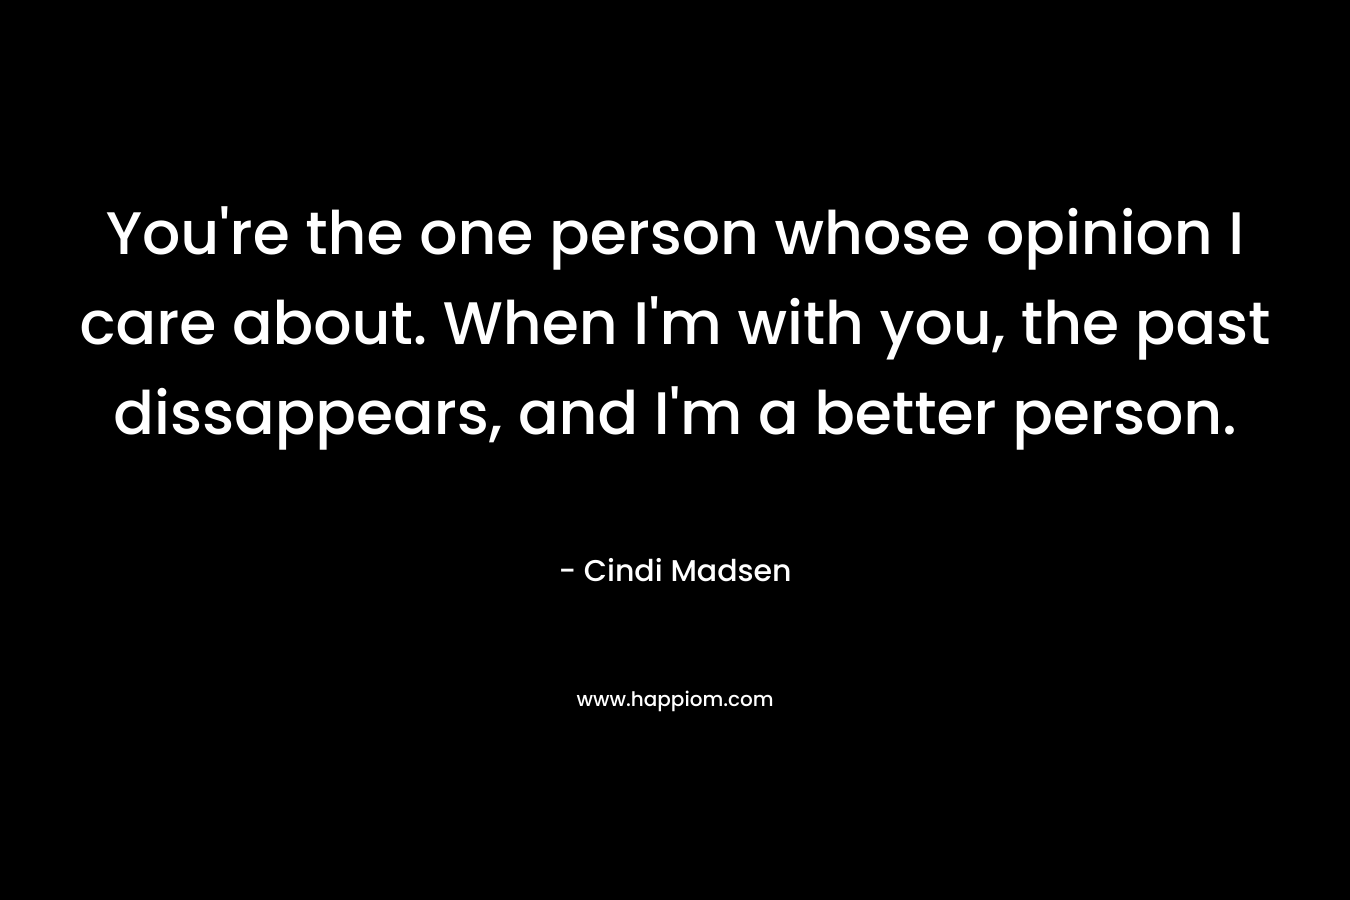 You’re the one person whose opinion I care about. When I’m with you, the past dissappears, and I’m a better person. – Cindi Madsen